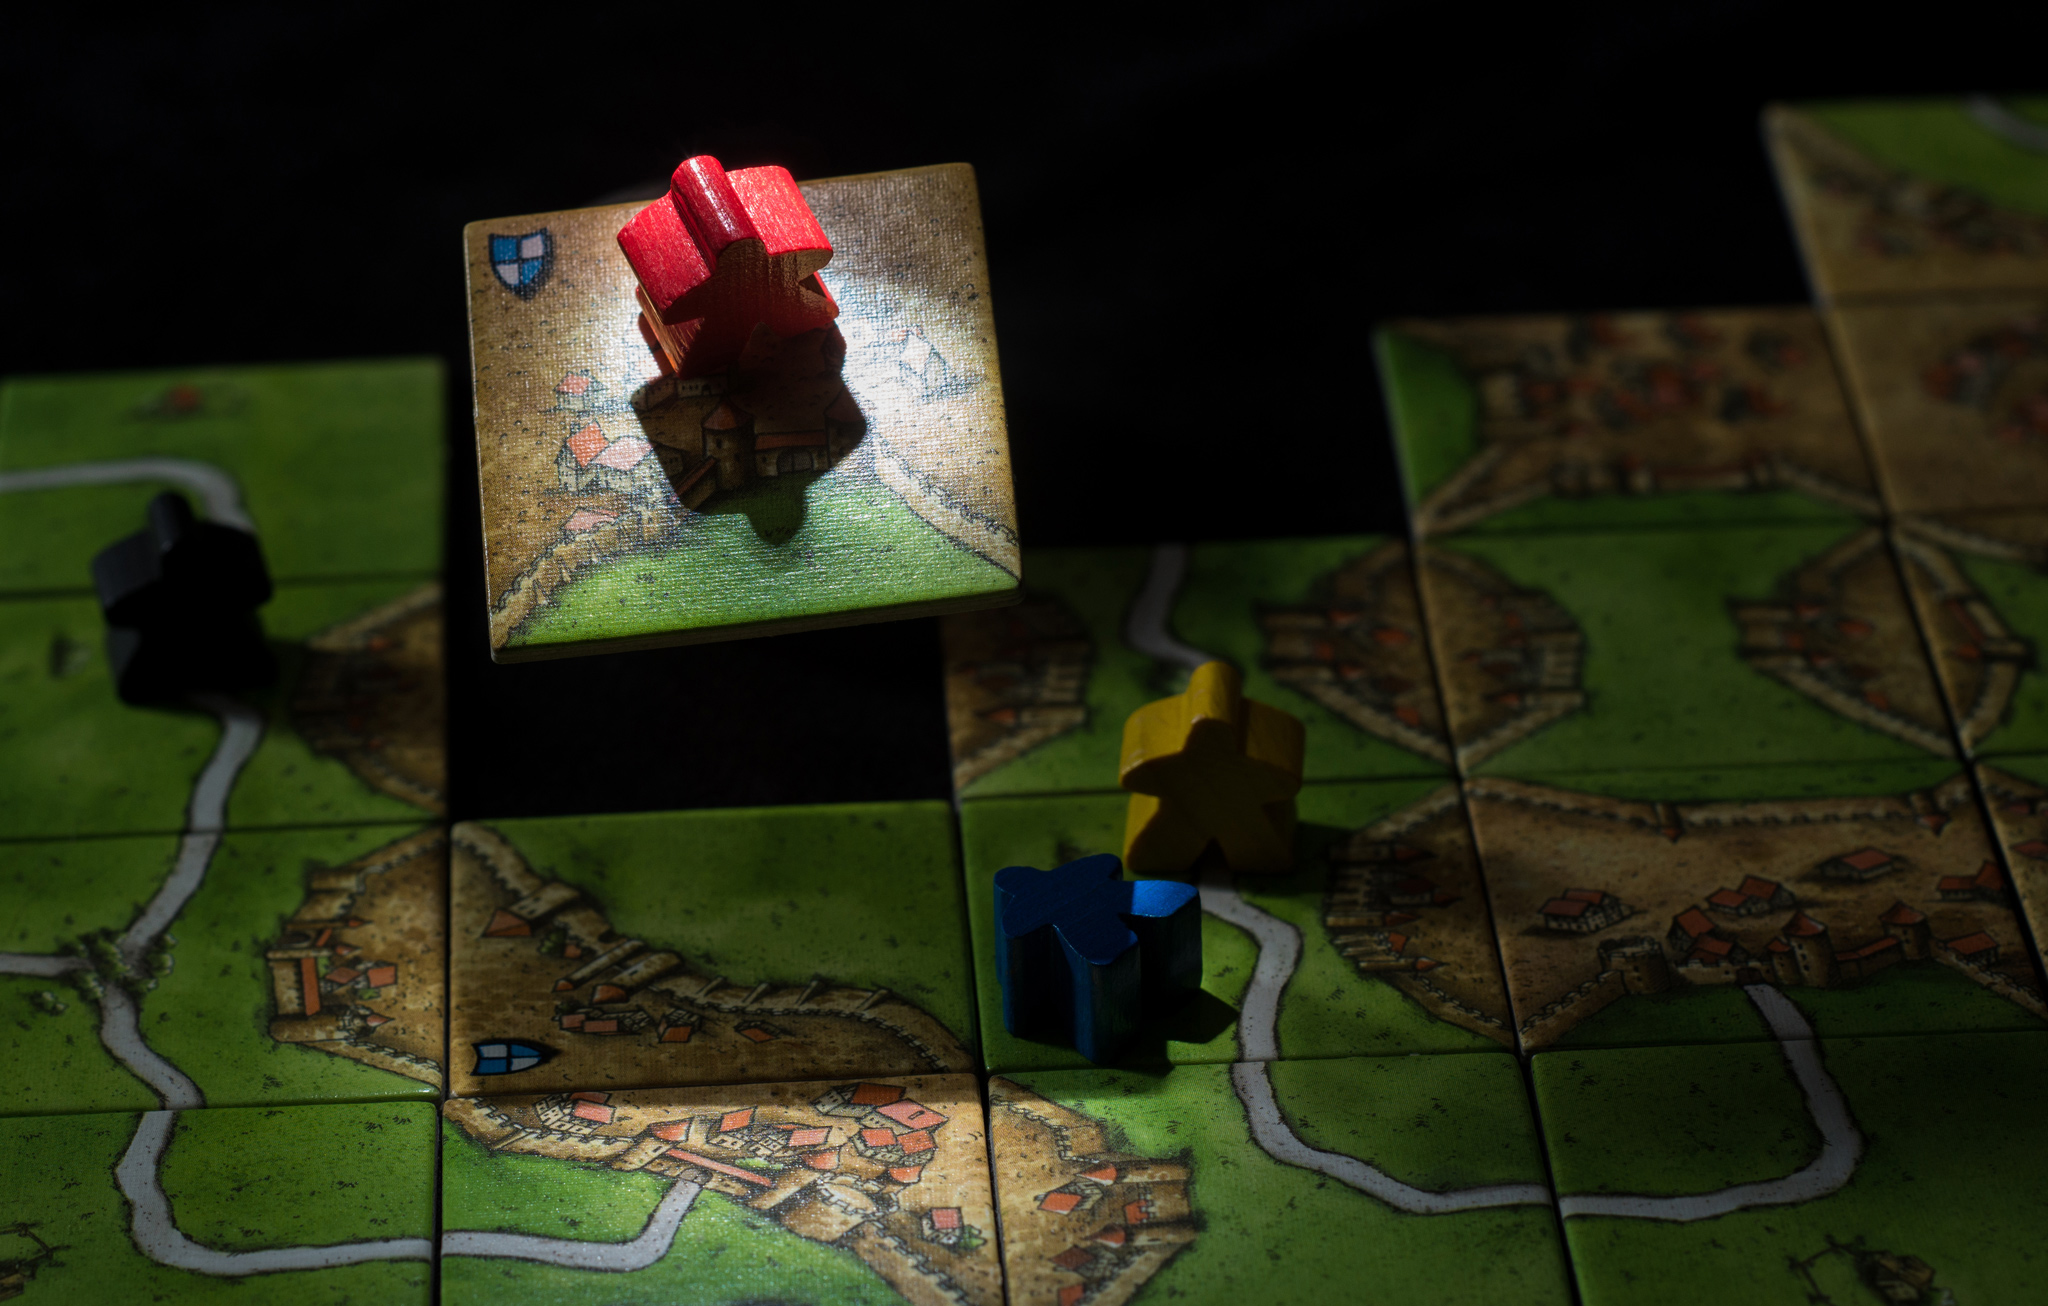 Knighted meeple in Carcassonne